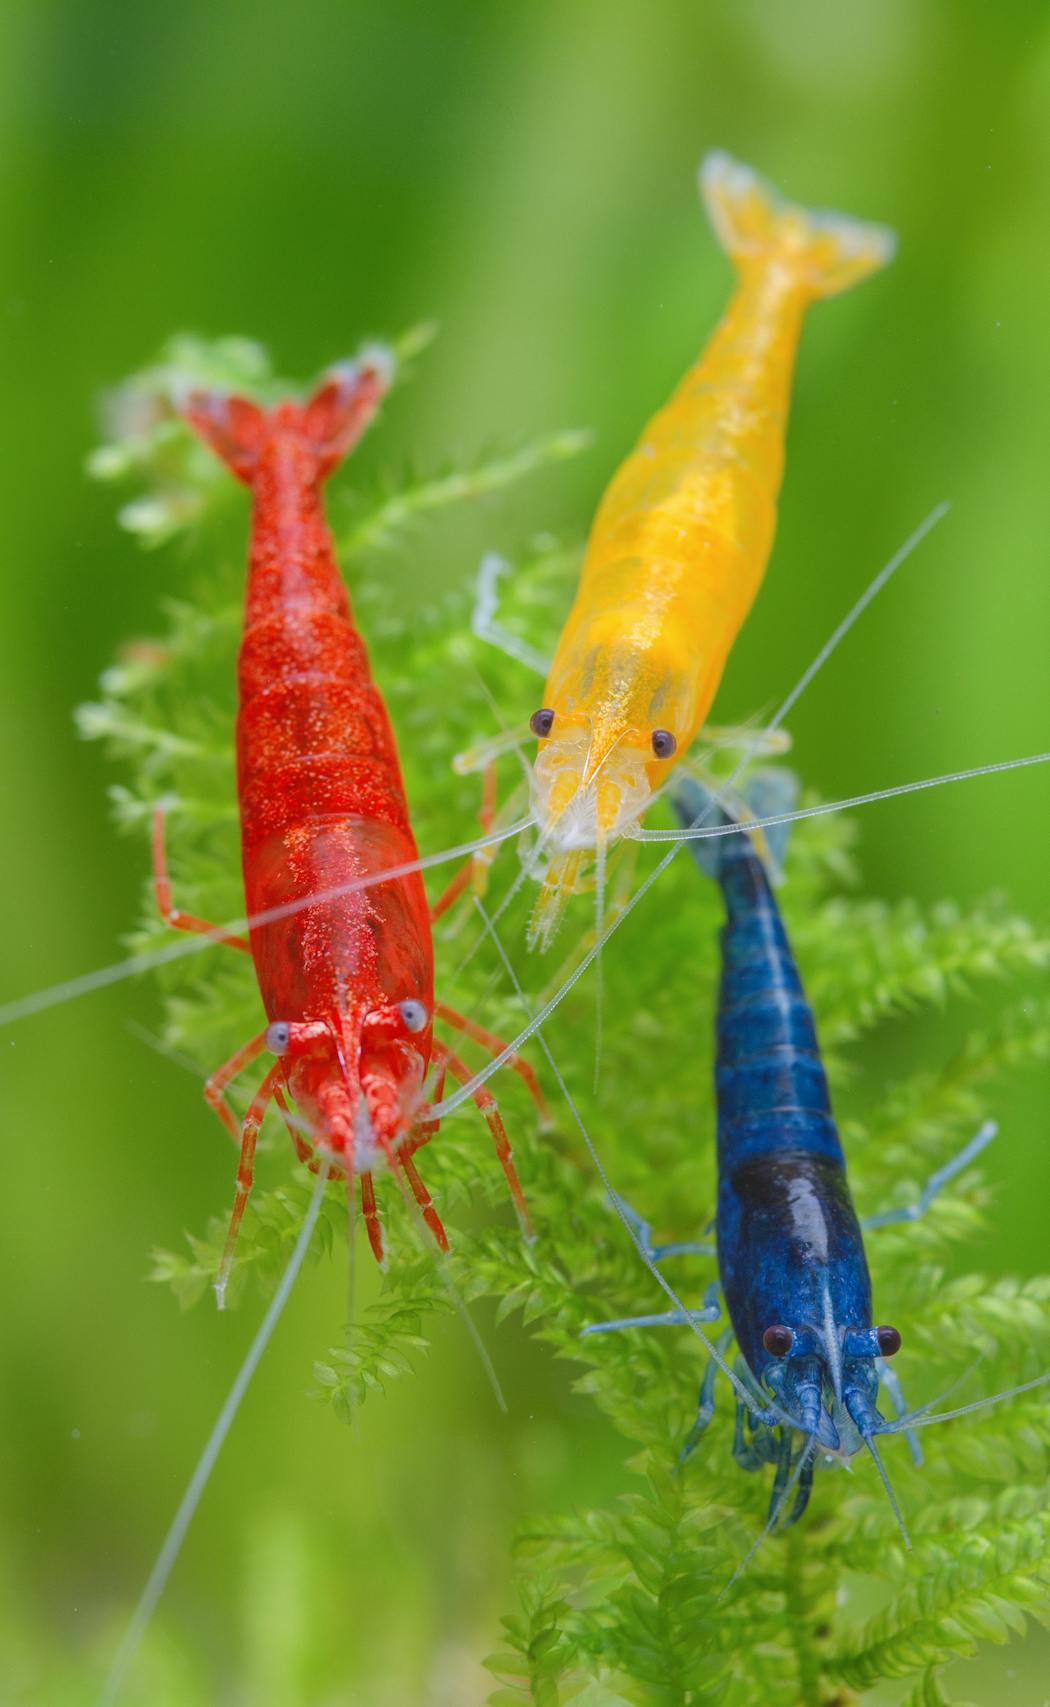 Some examples of the different colors of pet shrimp.